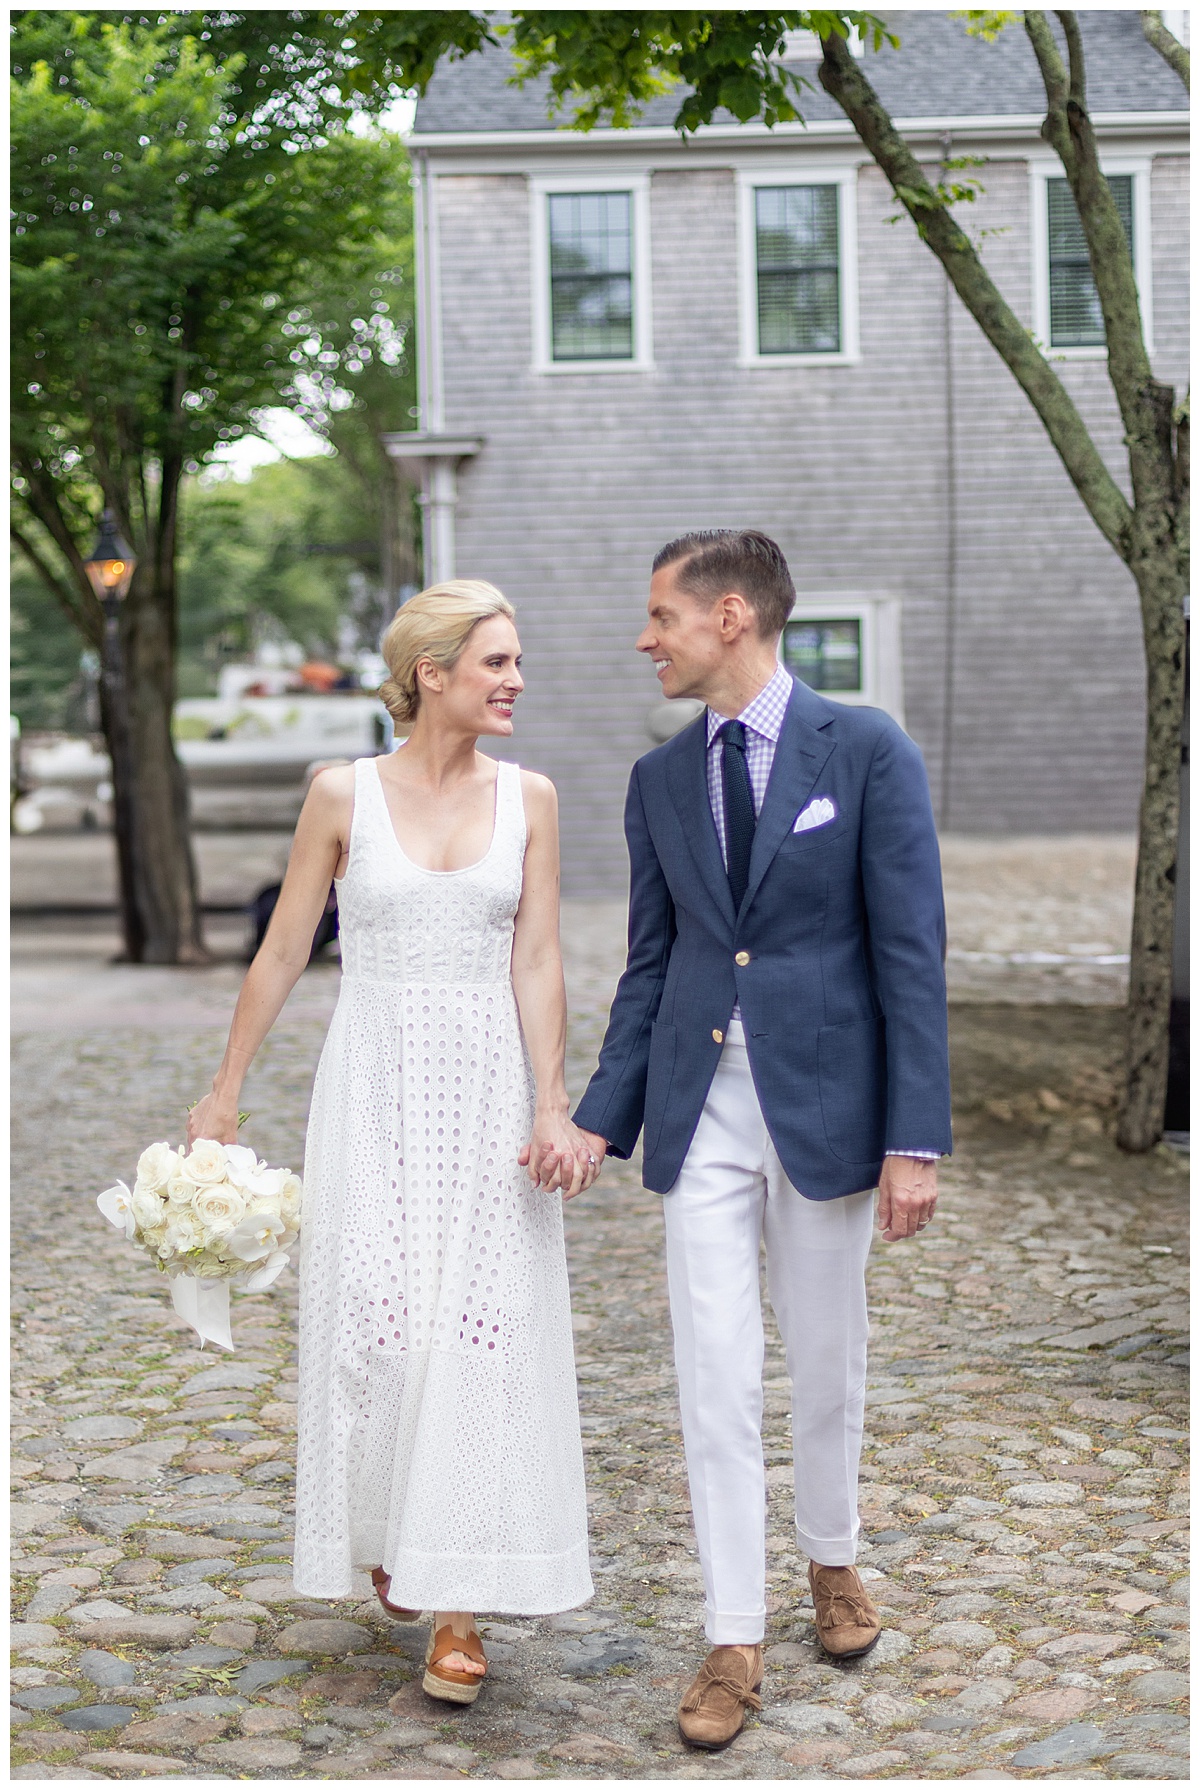 Bride and groom in Nantucket walking holding hands by the Old North Wharf. Bride wearing white dress groom in loafers and suit.